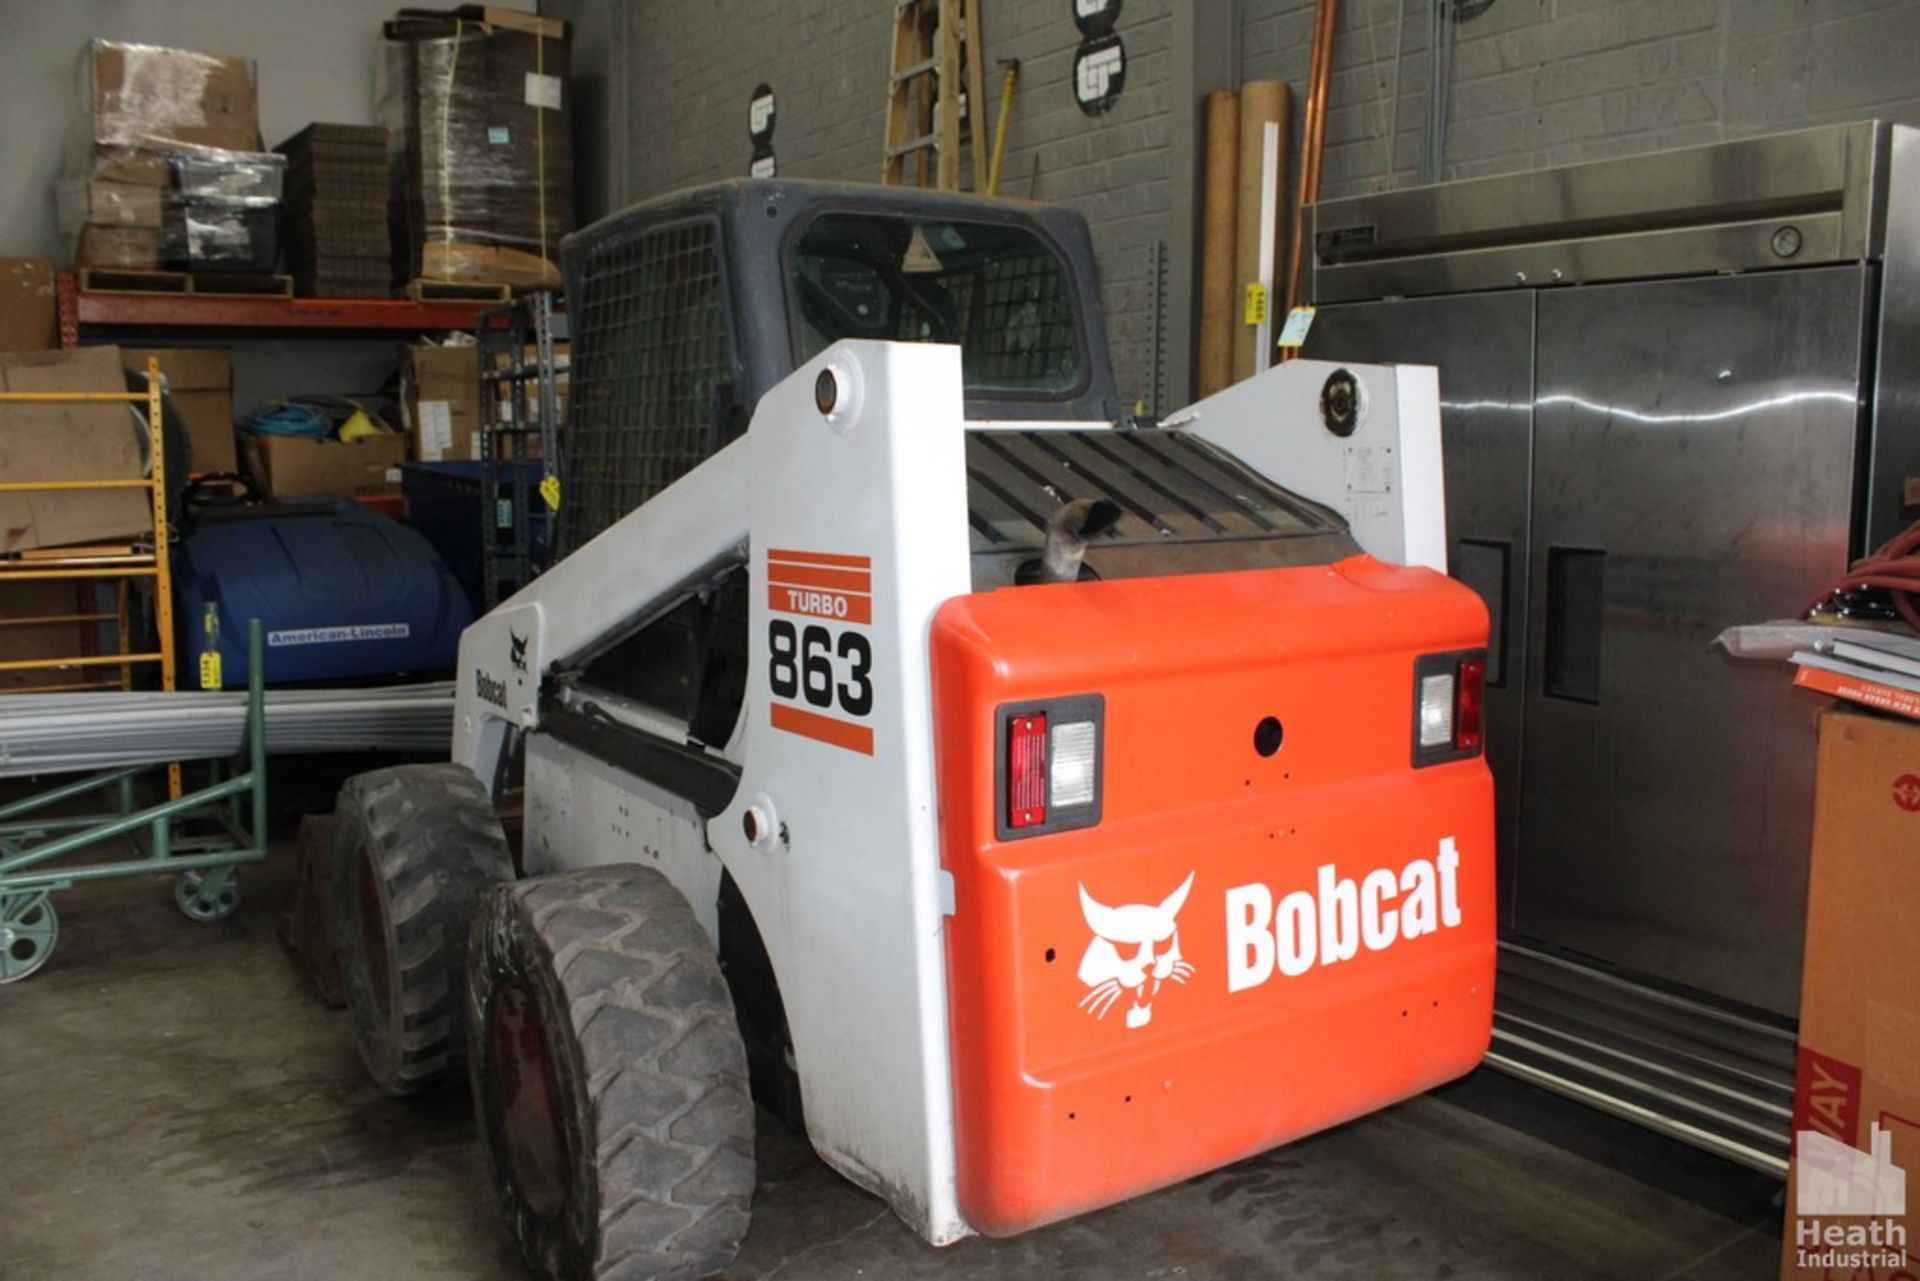 BOBCAT 863 SKID LOADER, DUETZ 4-CYLINDER DIESEL ENGINE, CAB WITH HEAT AND A/C, AUXILLARY HYDRAULICS - Image 3 of 5